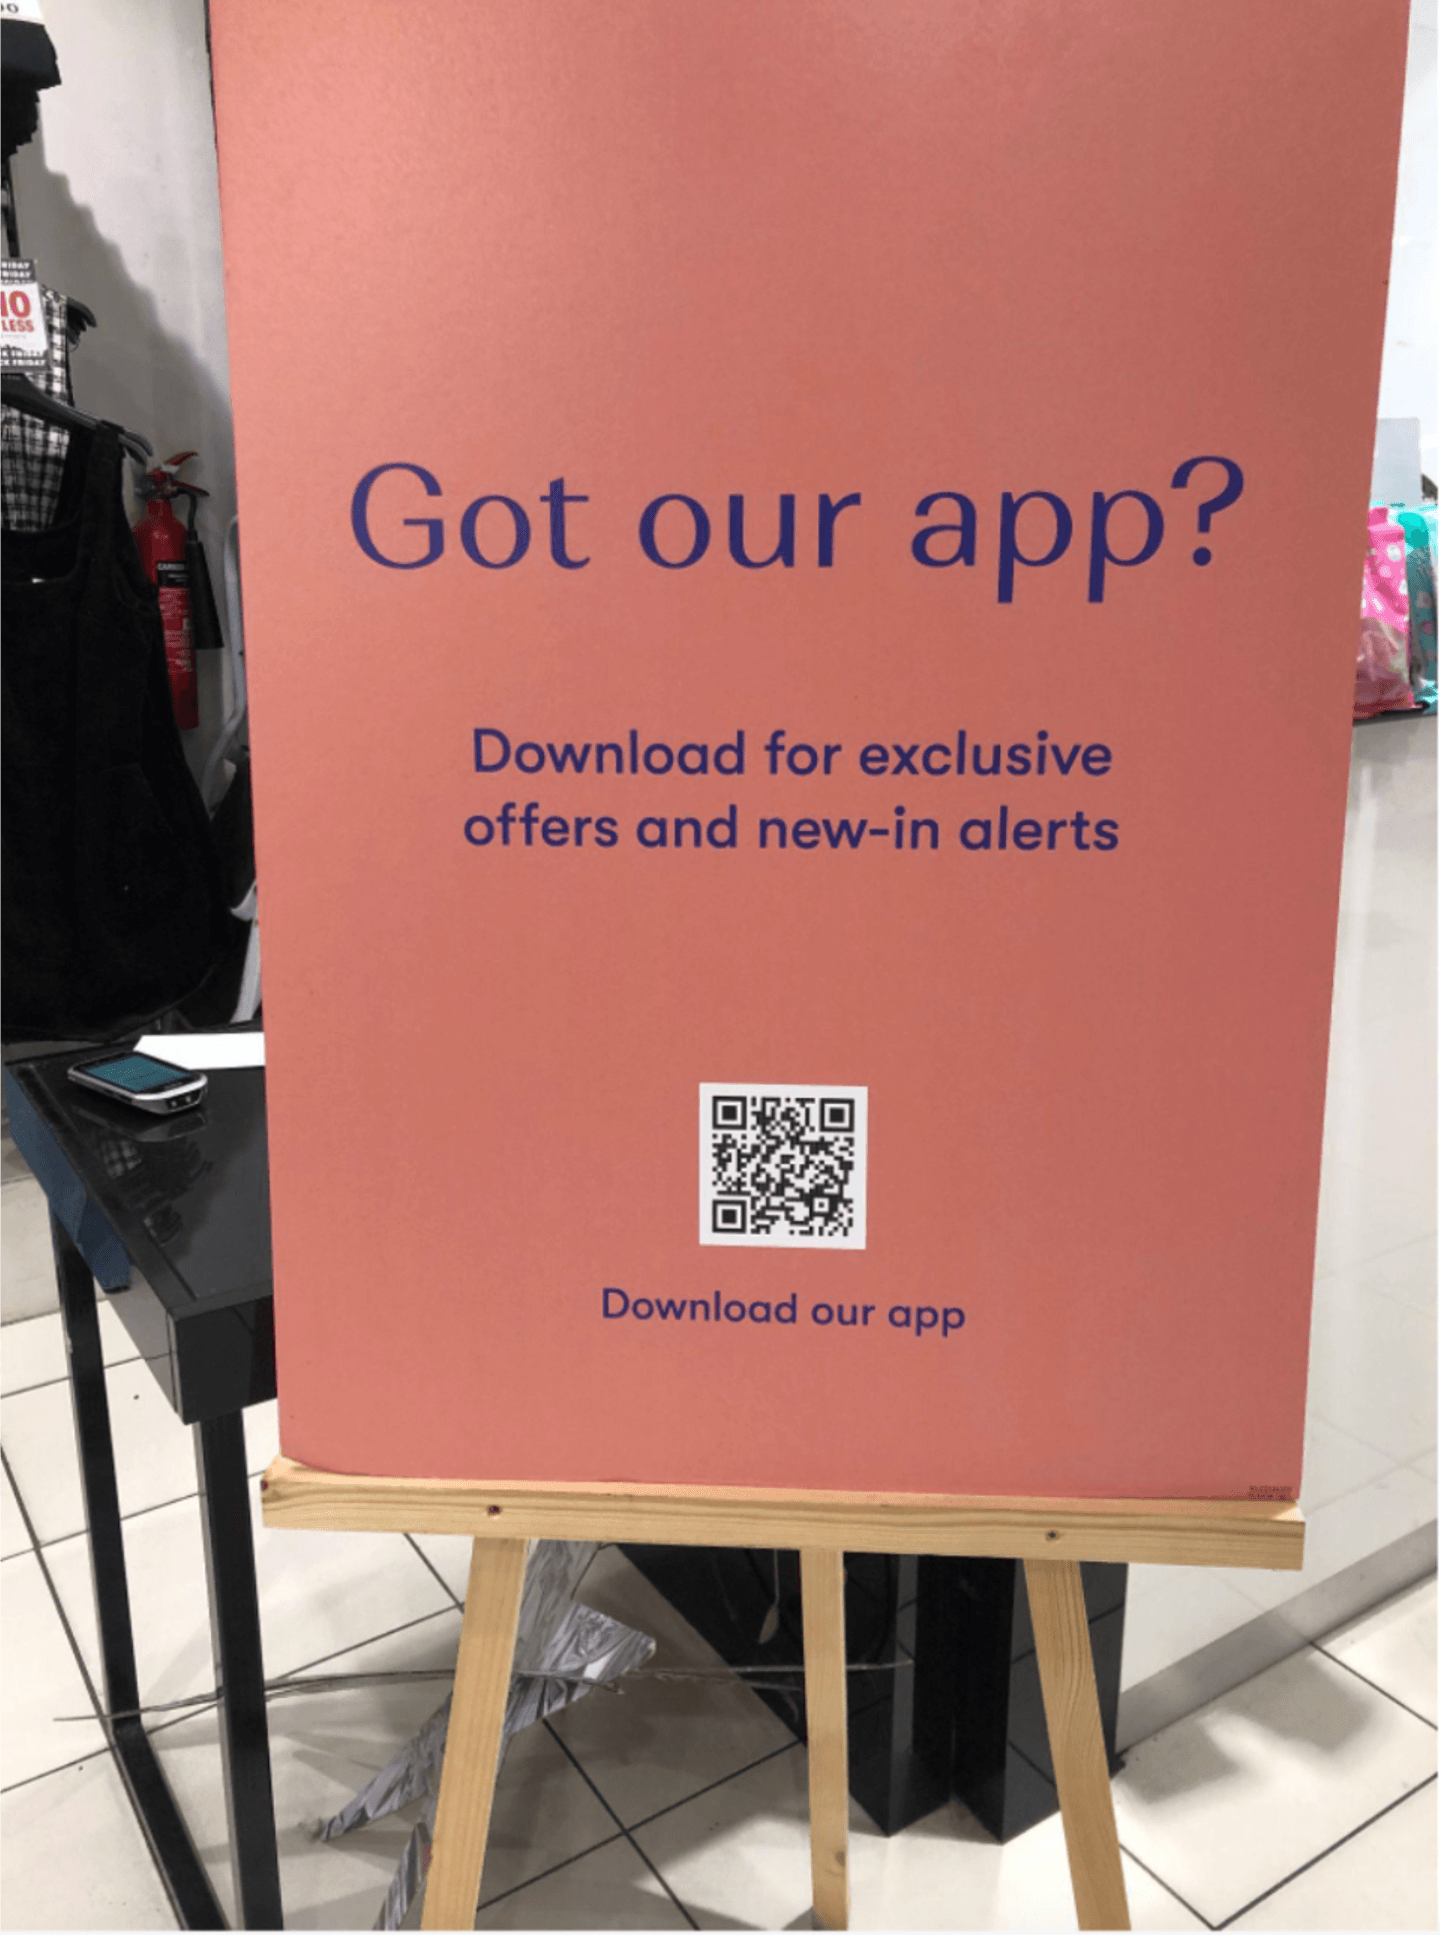 Picture of an in-store sign: "Got our app?" The sign shows a scannable QR code to take shoppers to the app.